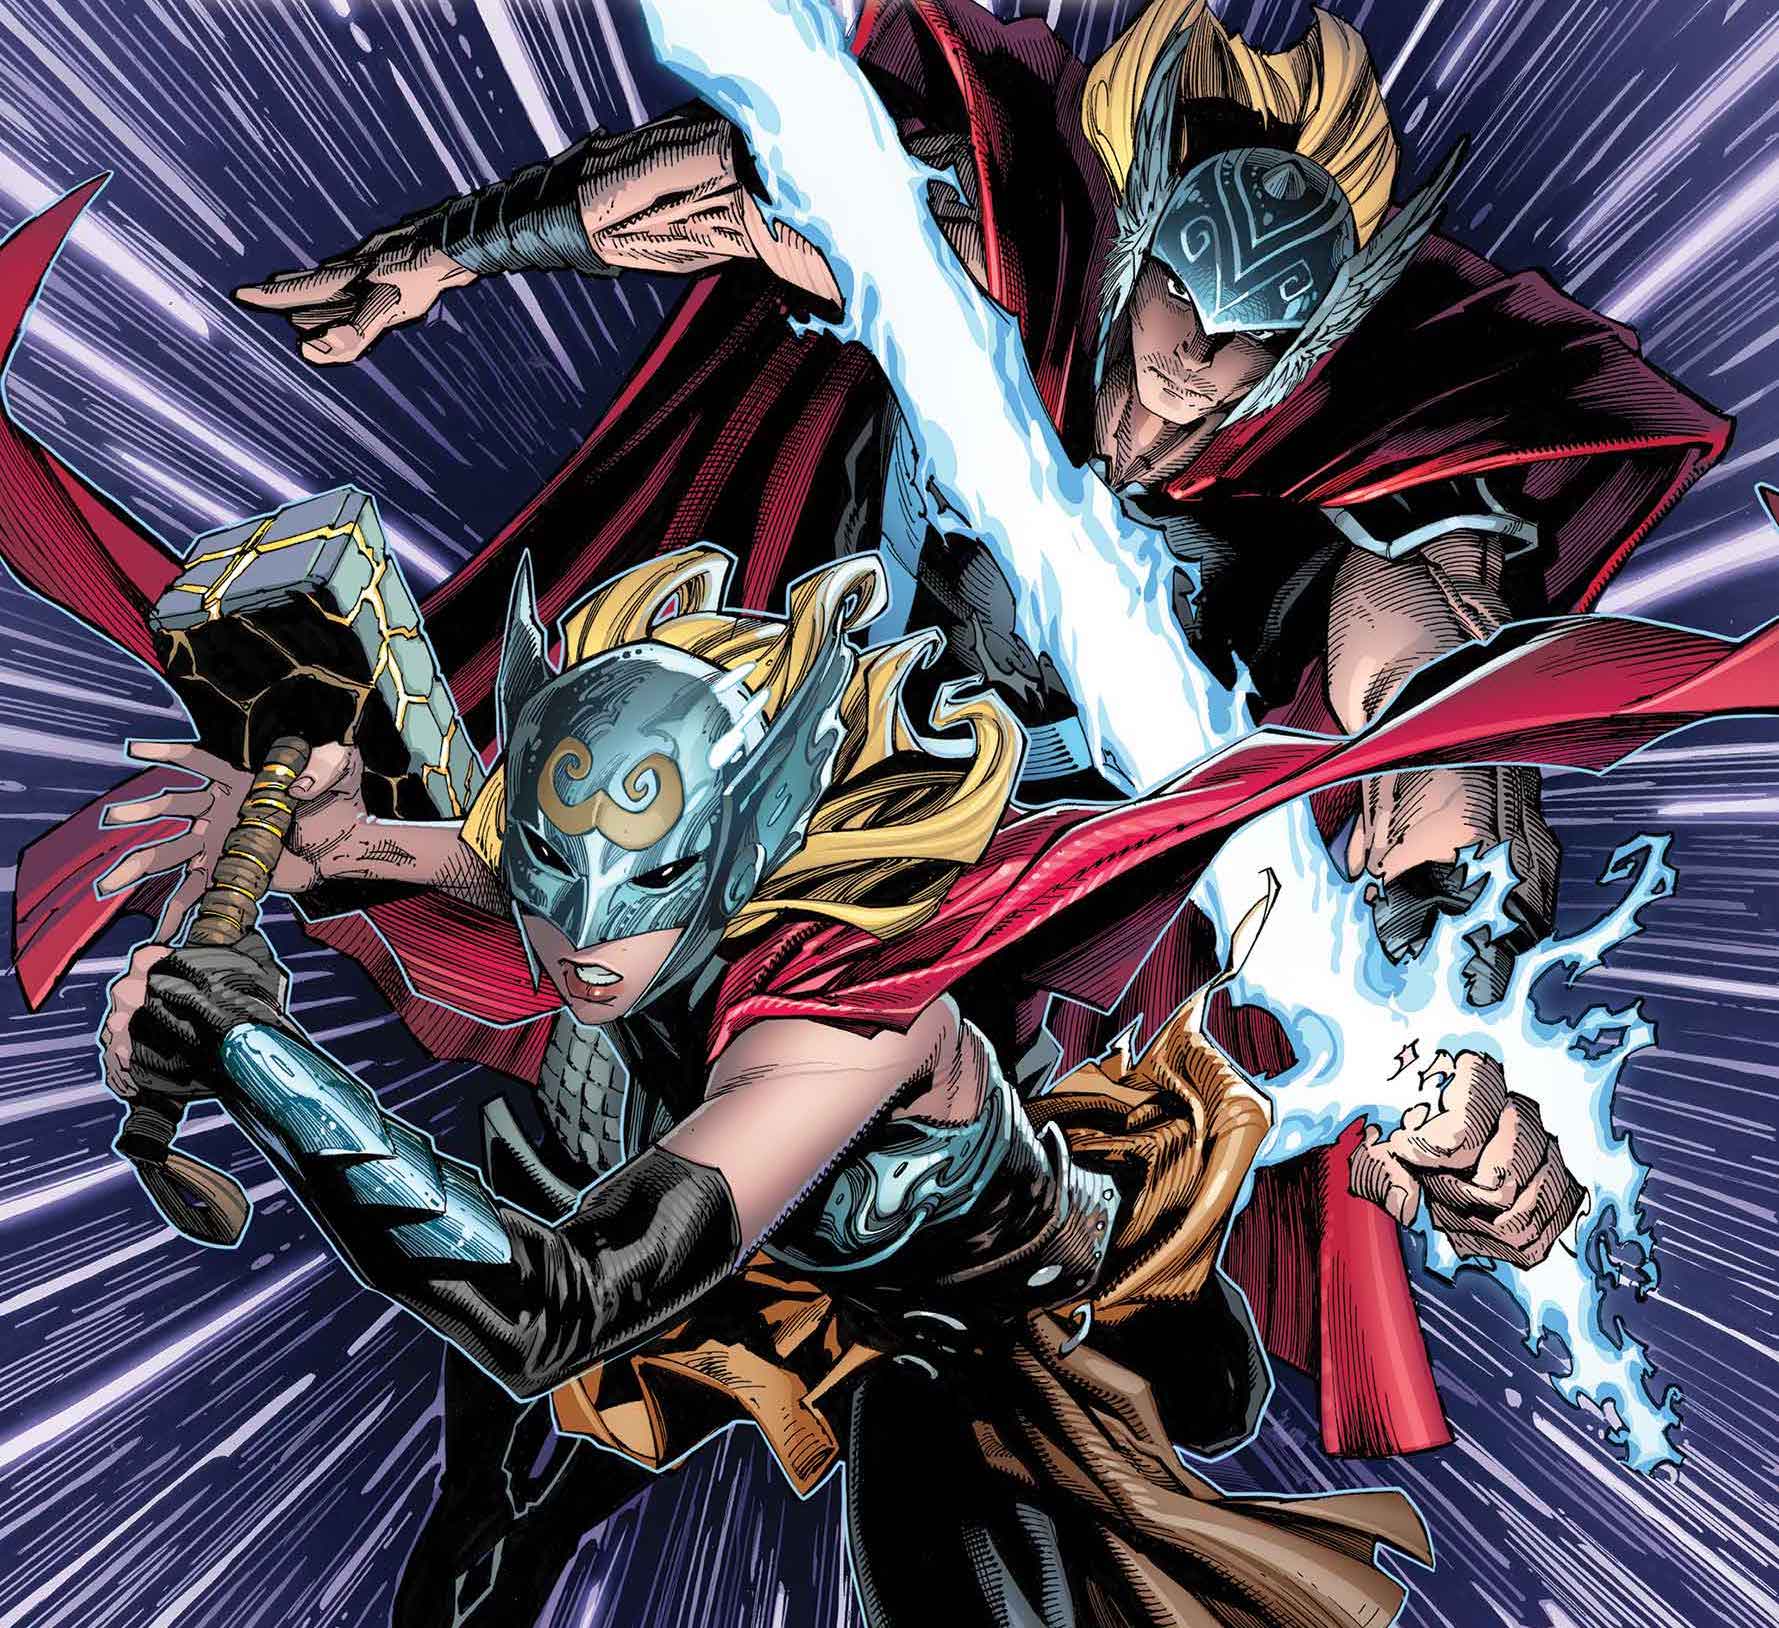 EXCLUSIVE Marvel Preview: Jane Foster & the Mighty Thor #1